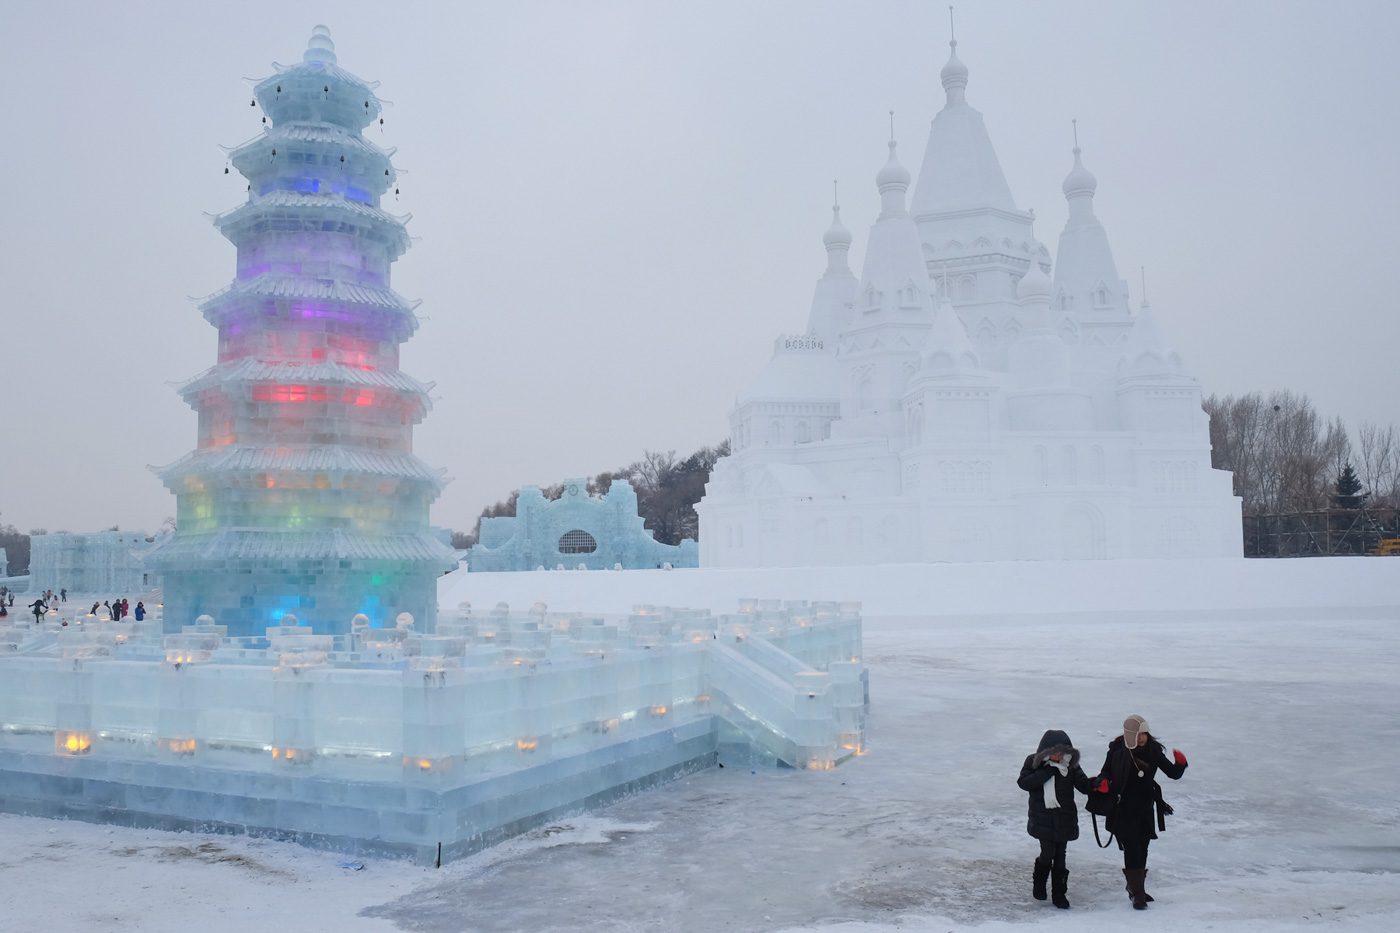 ICE SCULPTURES. Photo shot in Harbin, China by Philip Yu  